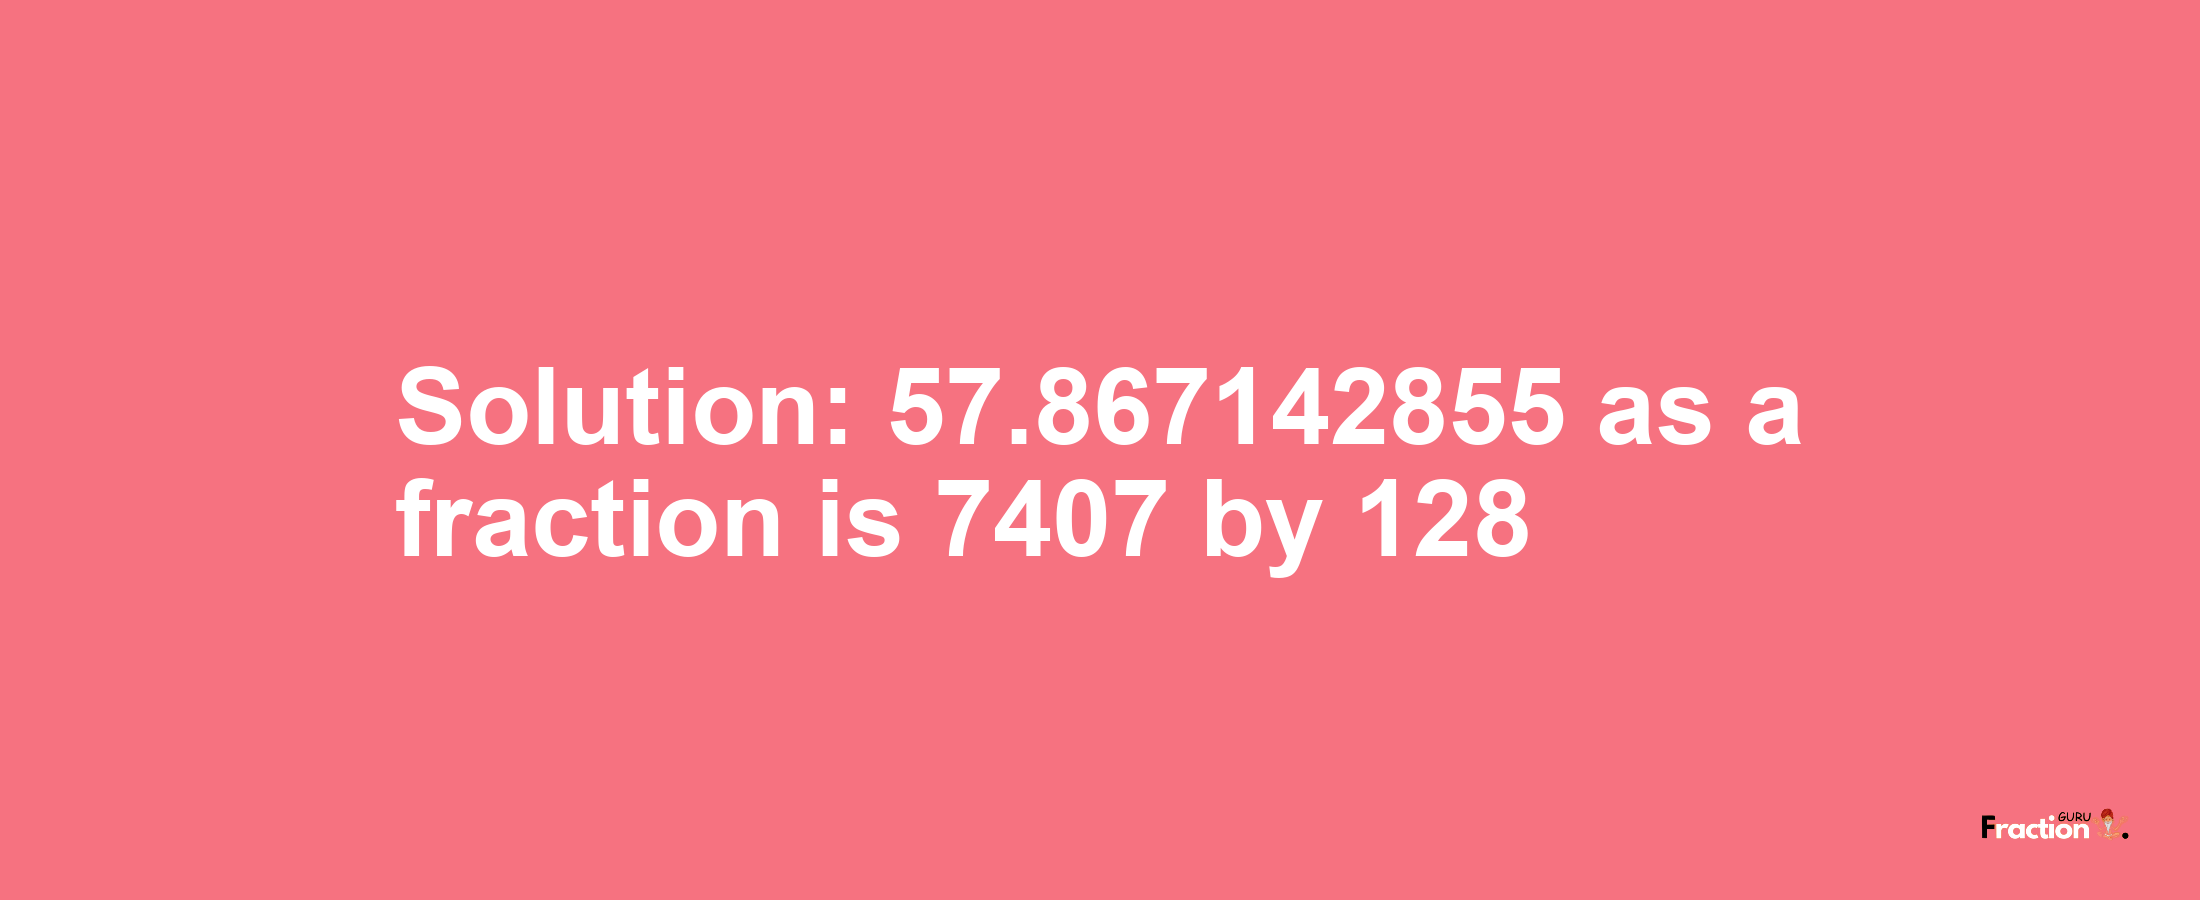 Solution:57.867142855 as a fraction is 7407/128